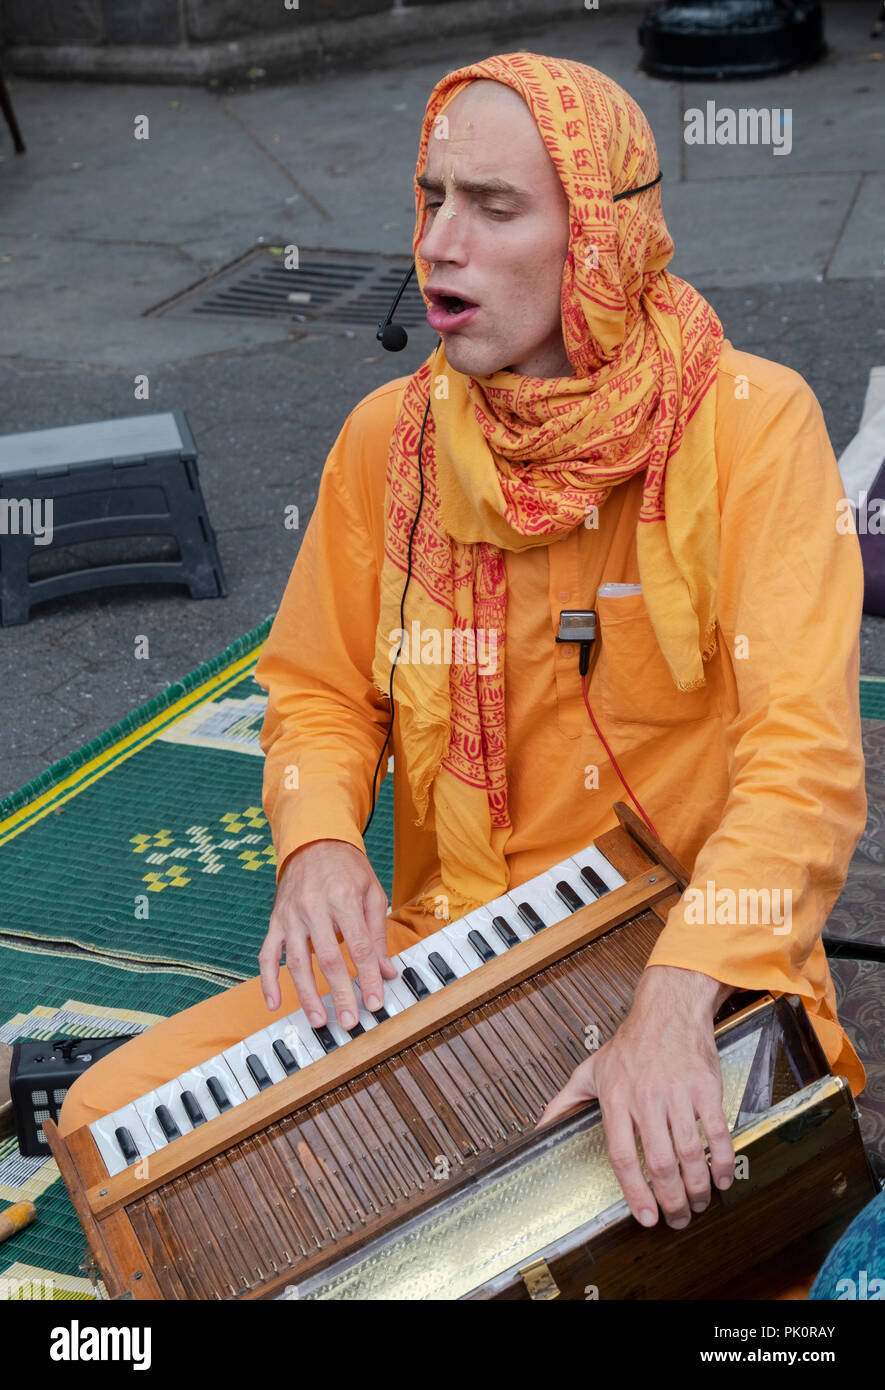 A Hare Krishna devotee playing the harmonium and chanting in Union Square Park in Manhattan, New York City. Stock Photo